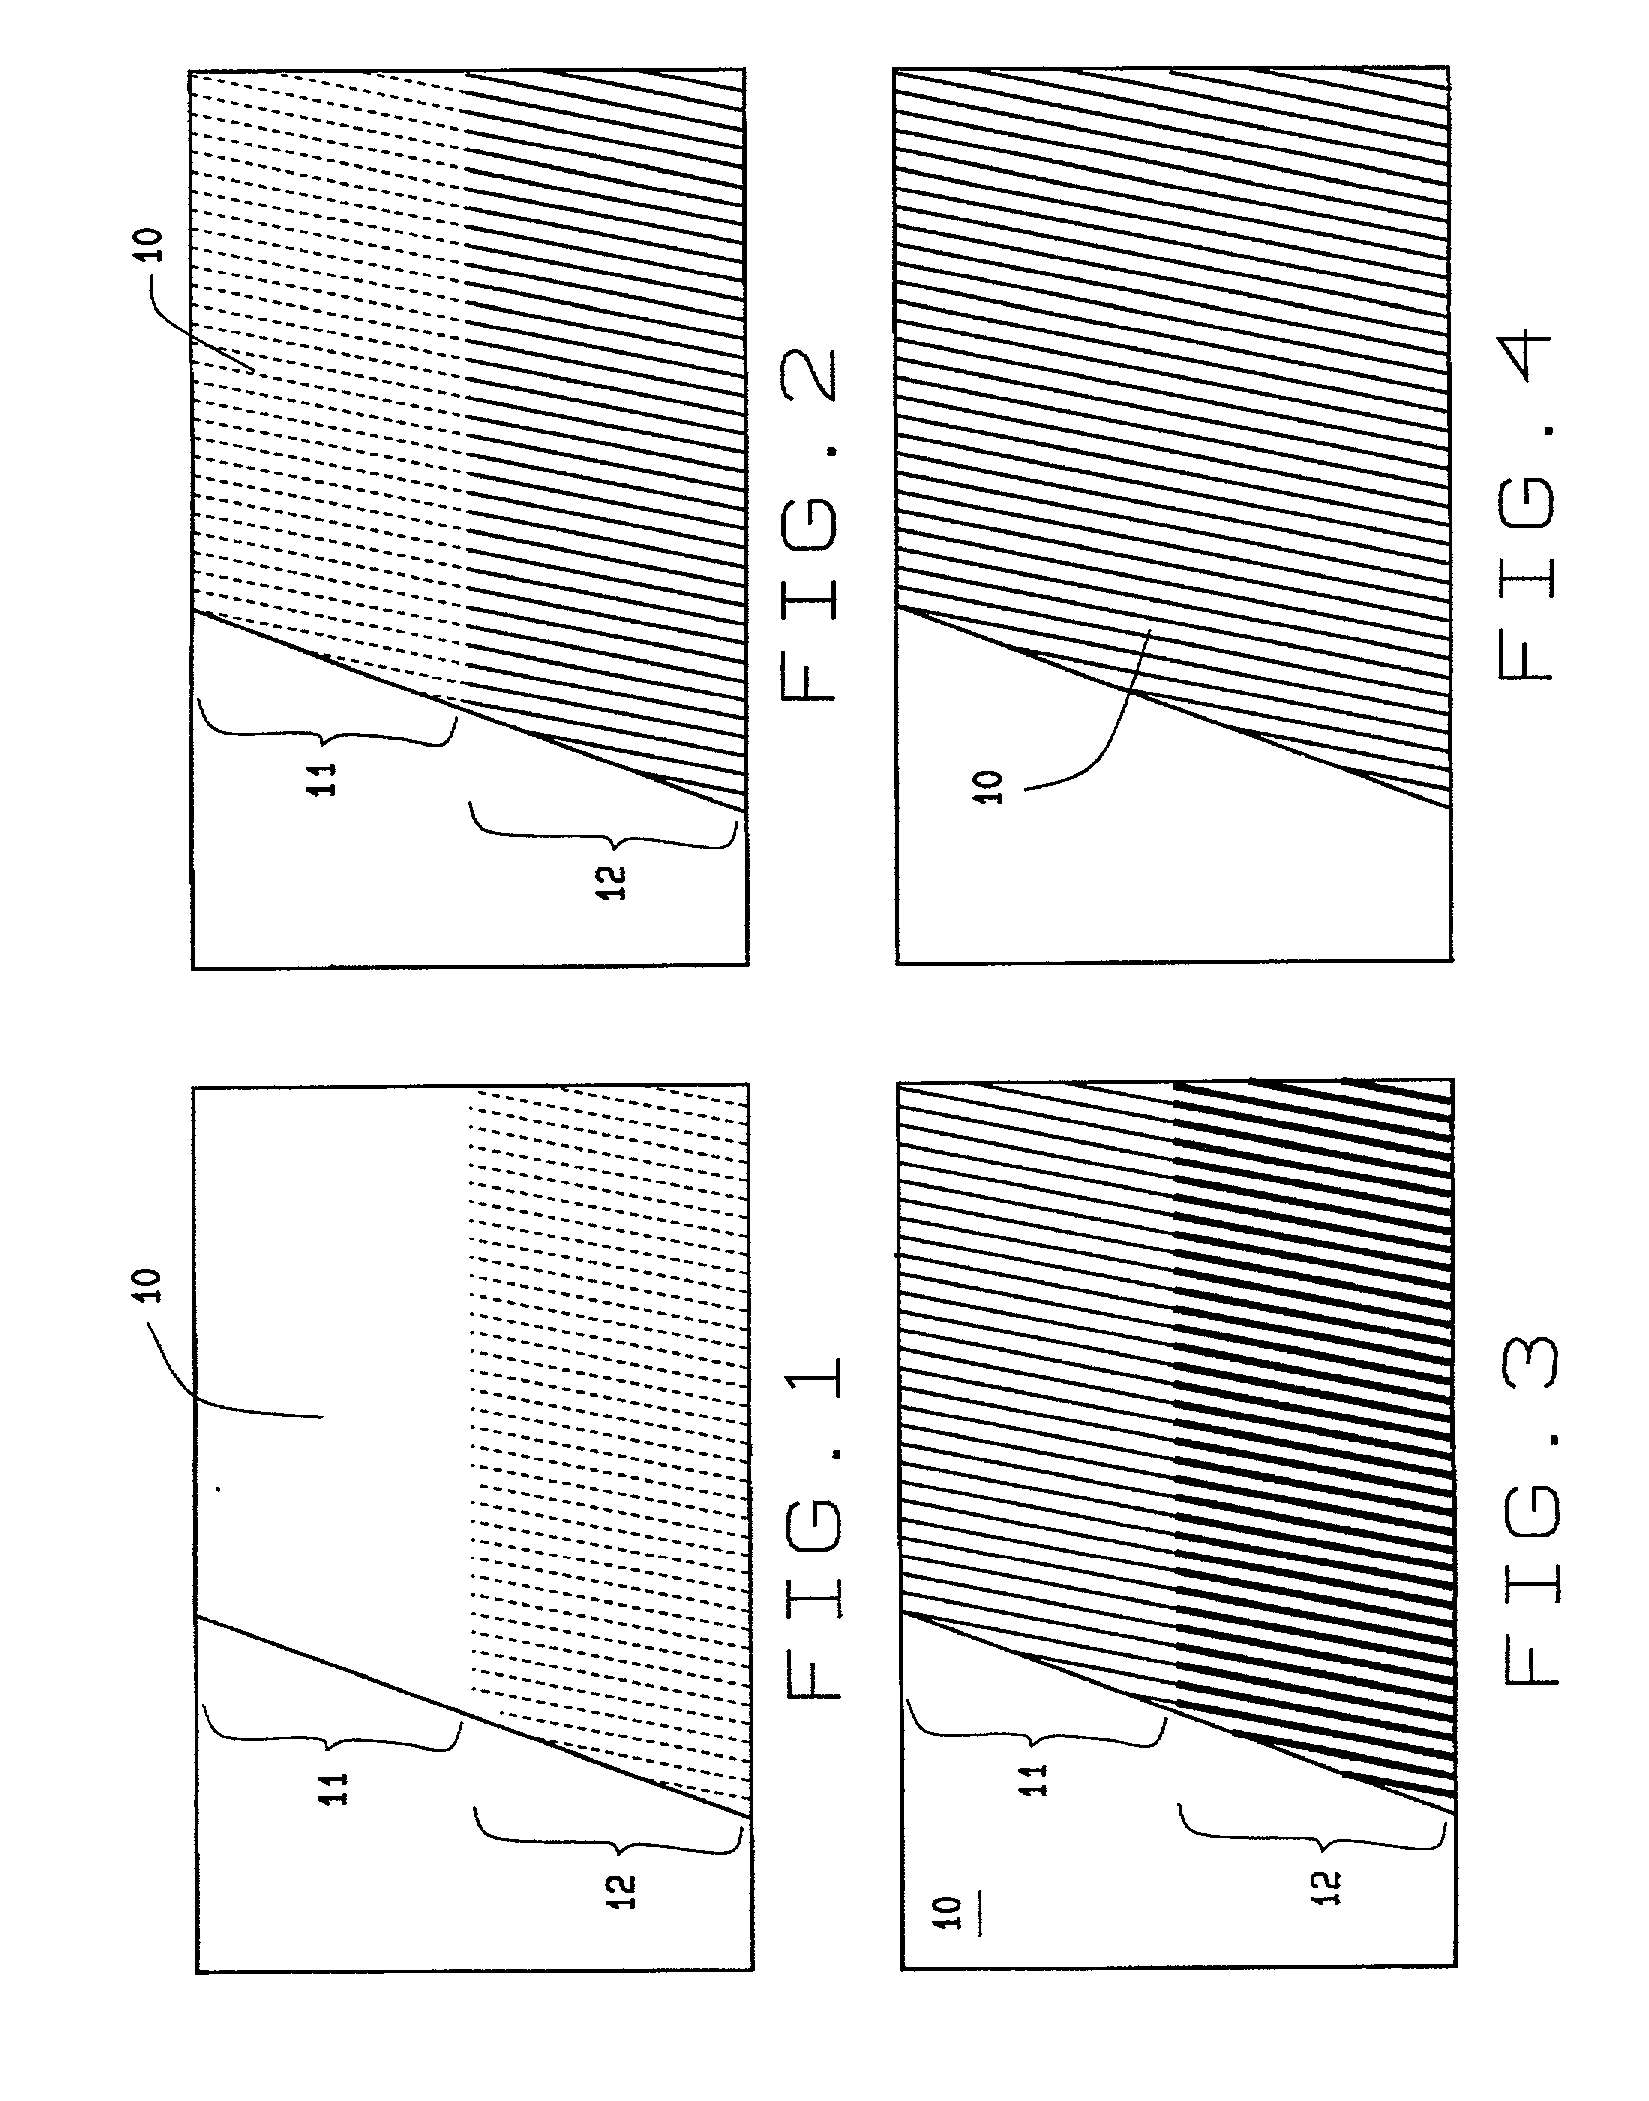 Method for high dynamic range image construction based on multiple images with multiple illumination intensities